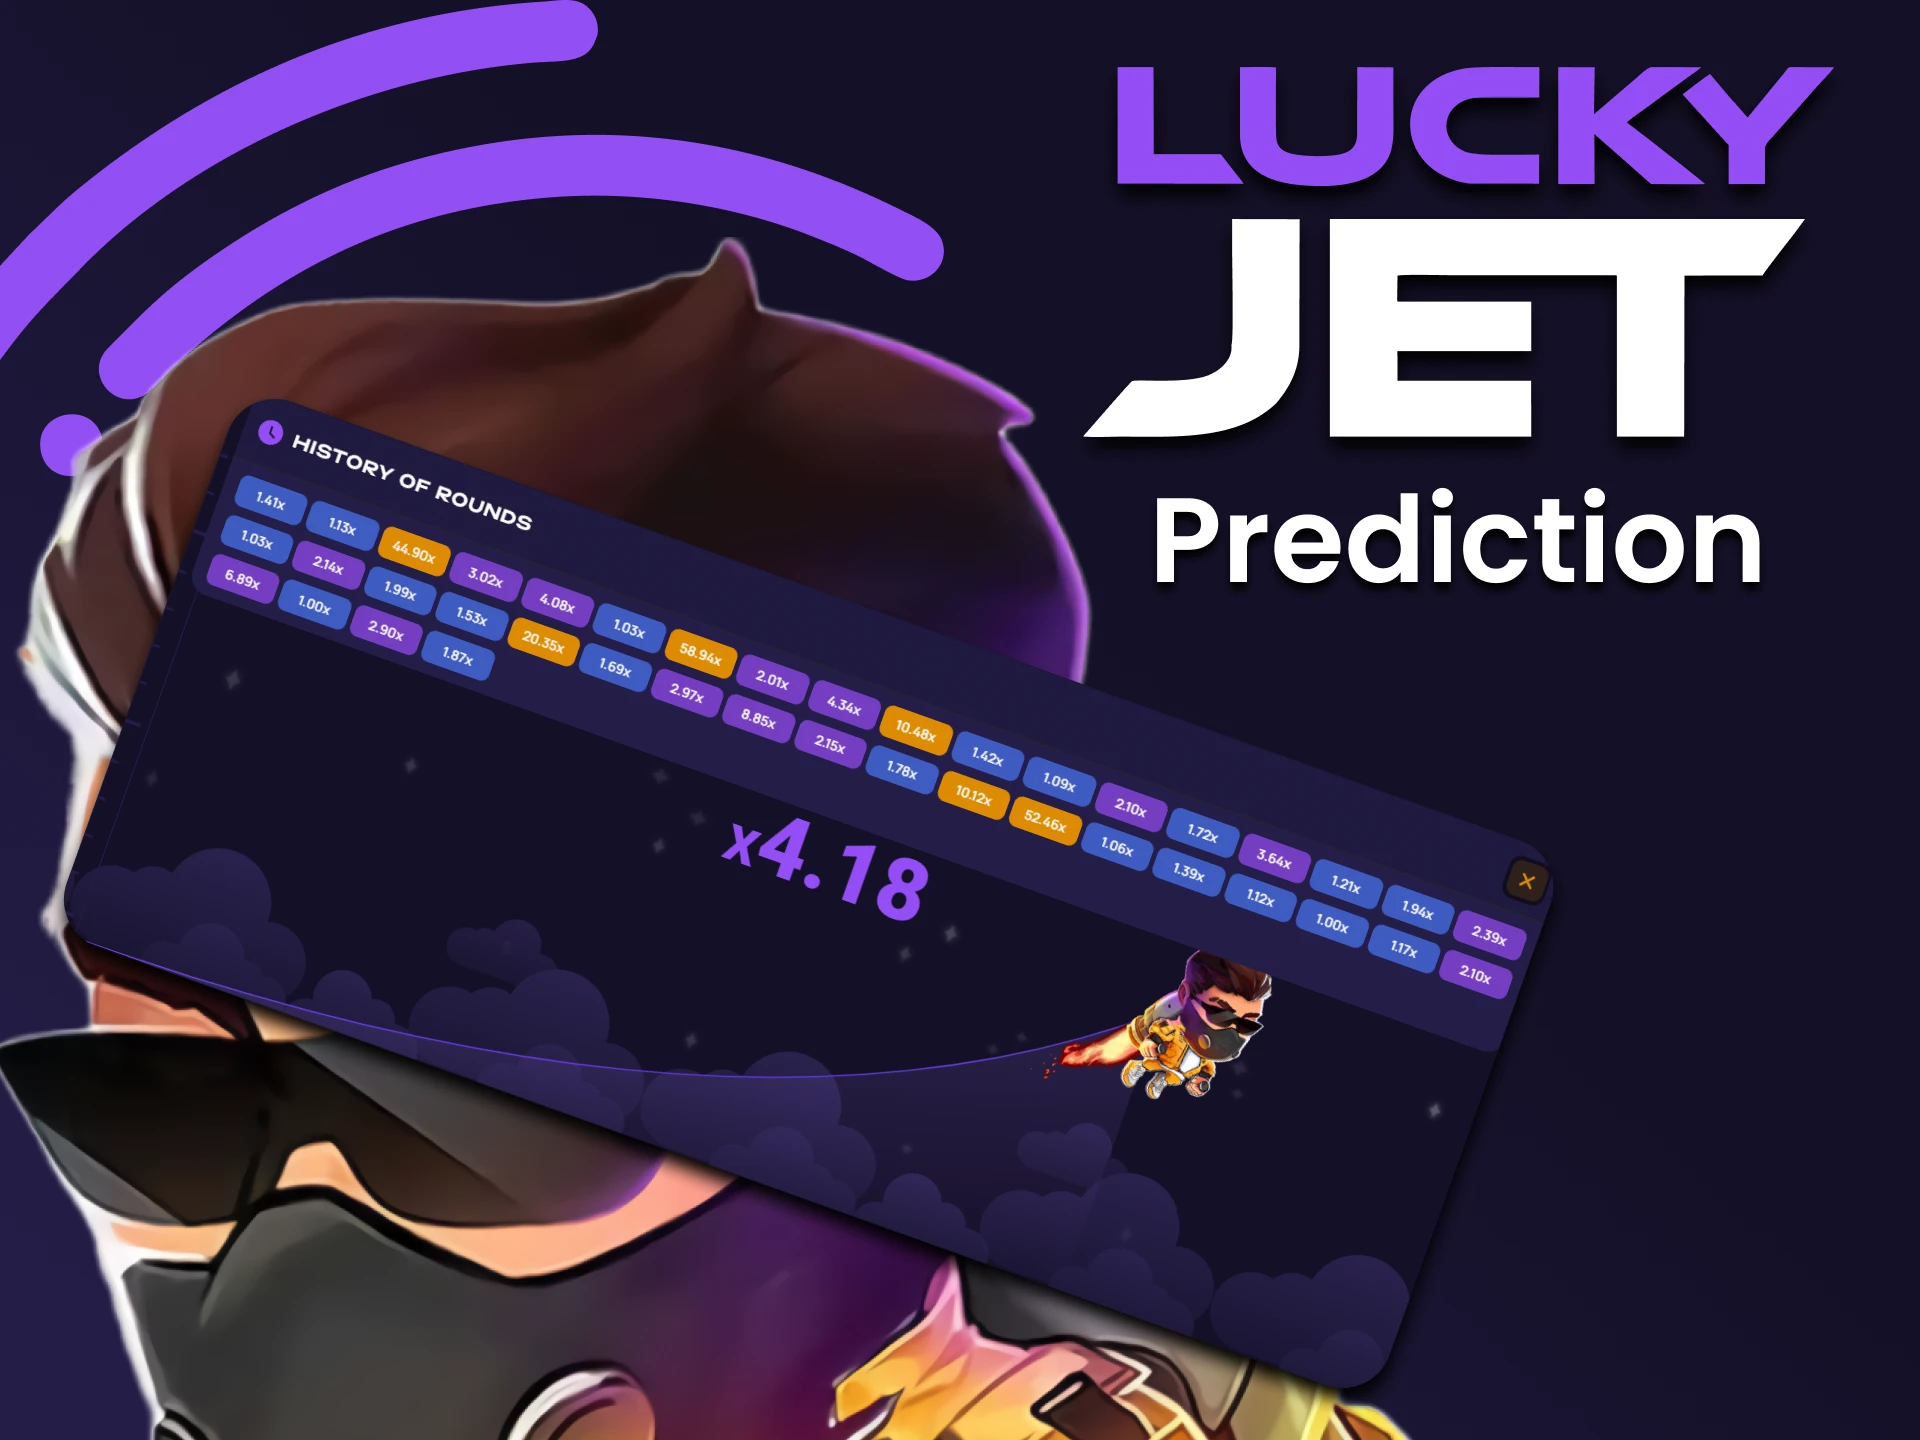 Do not try to use third party software to play Lucky Jet.